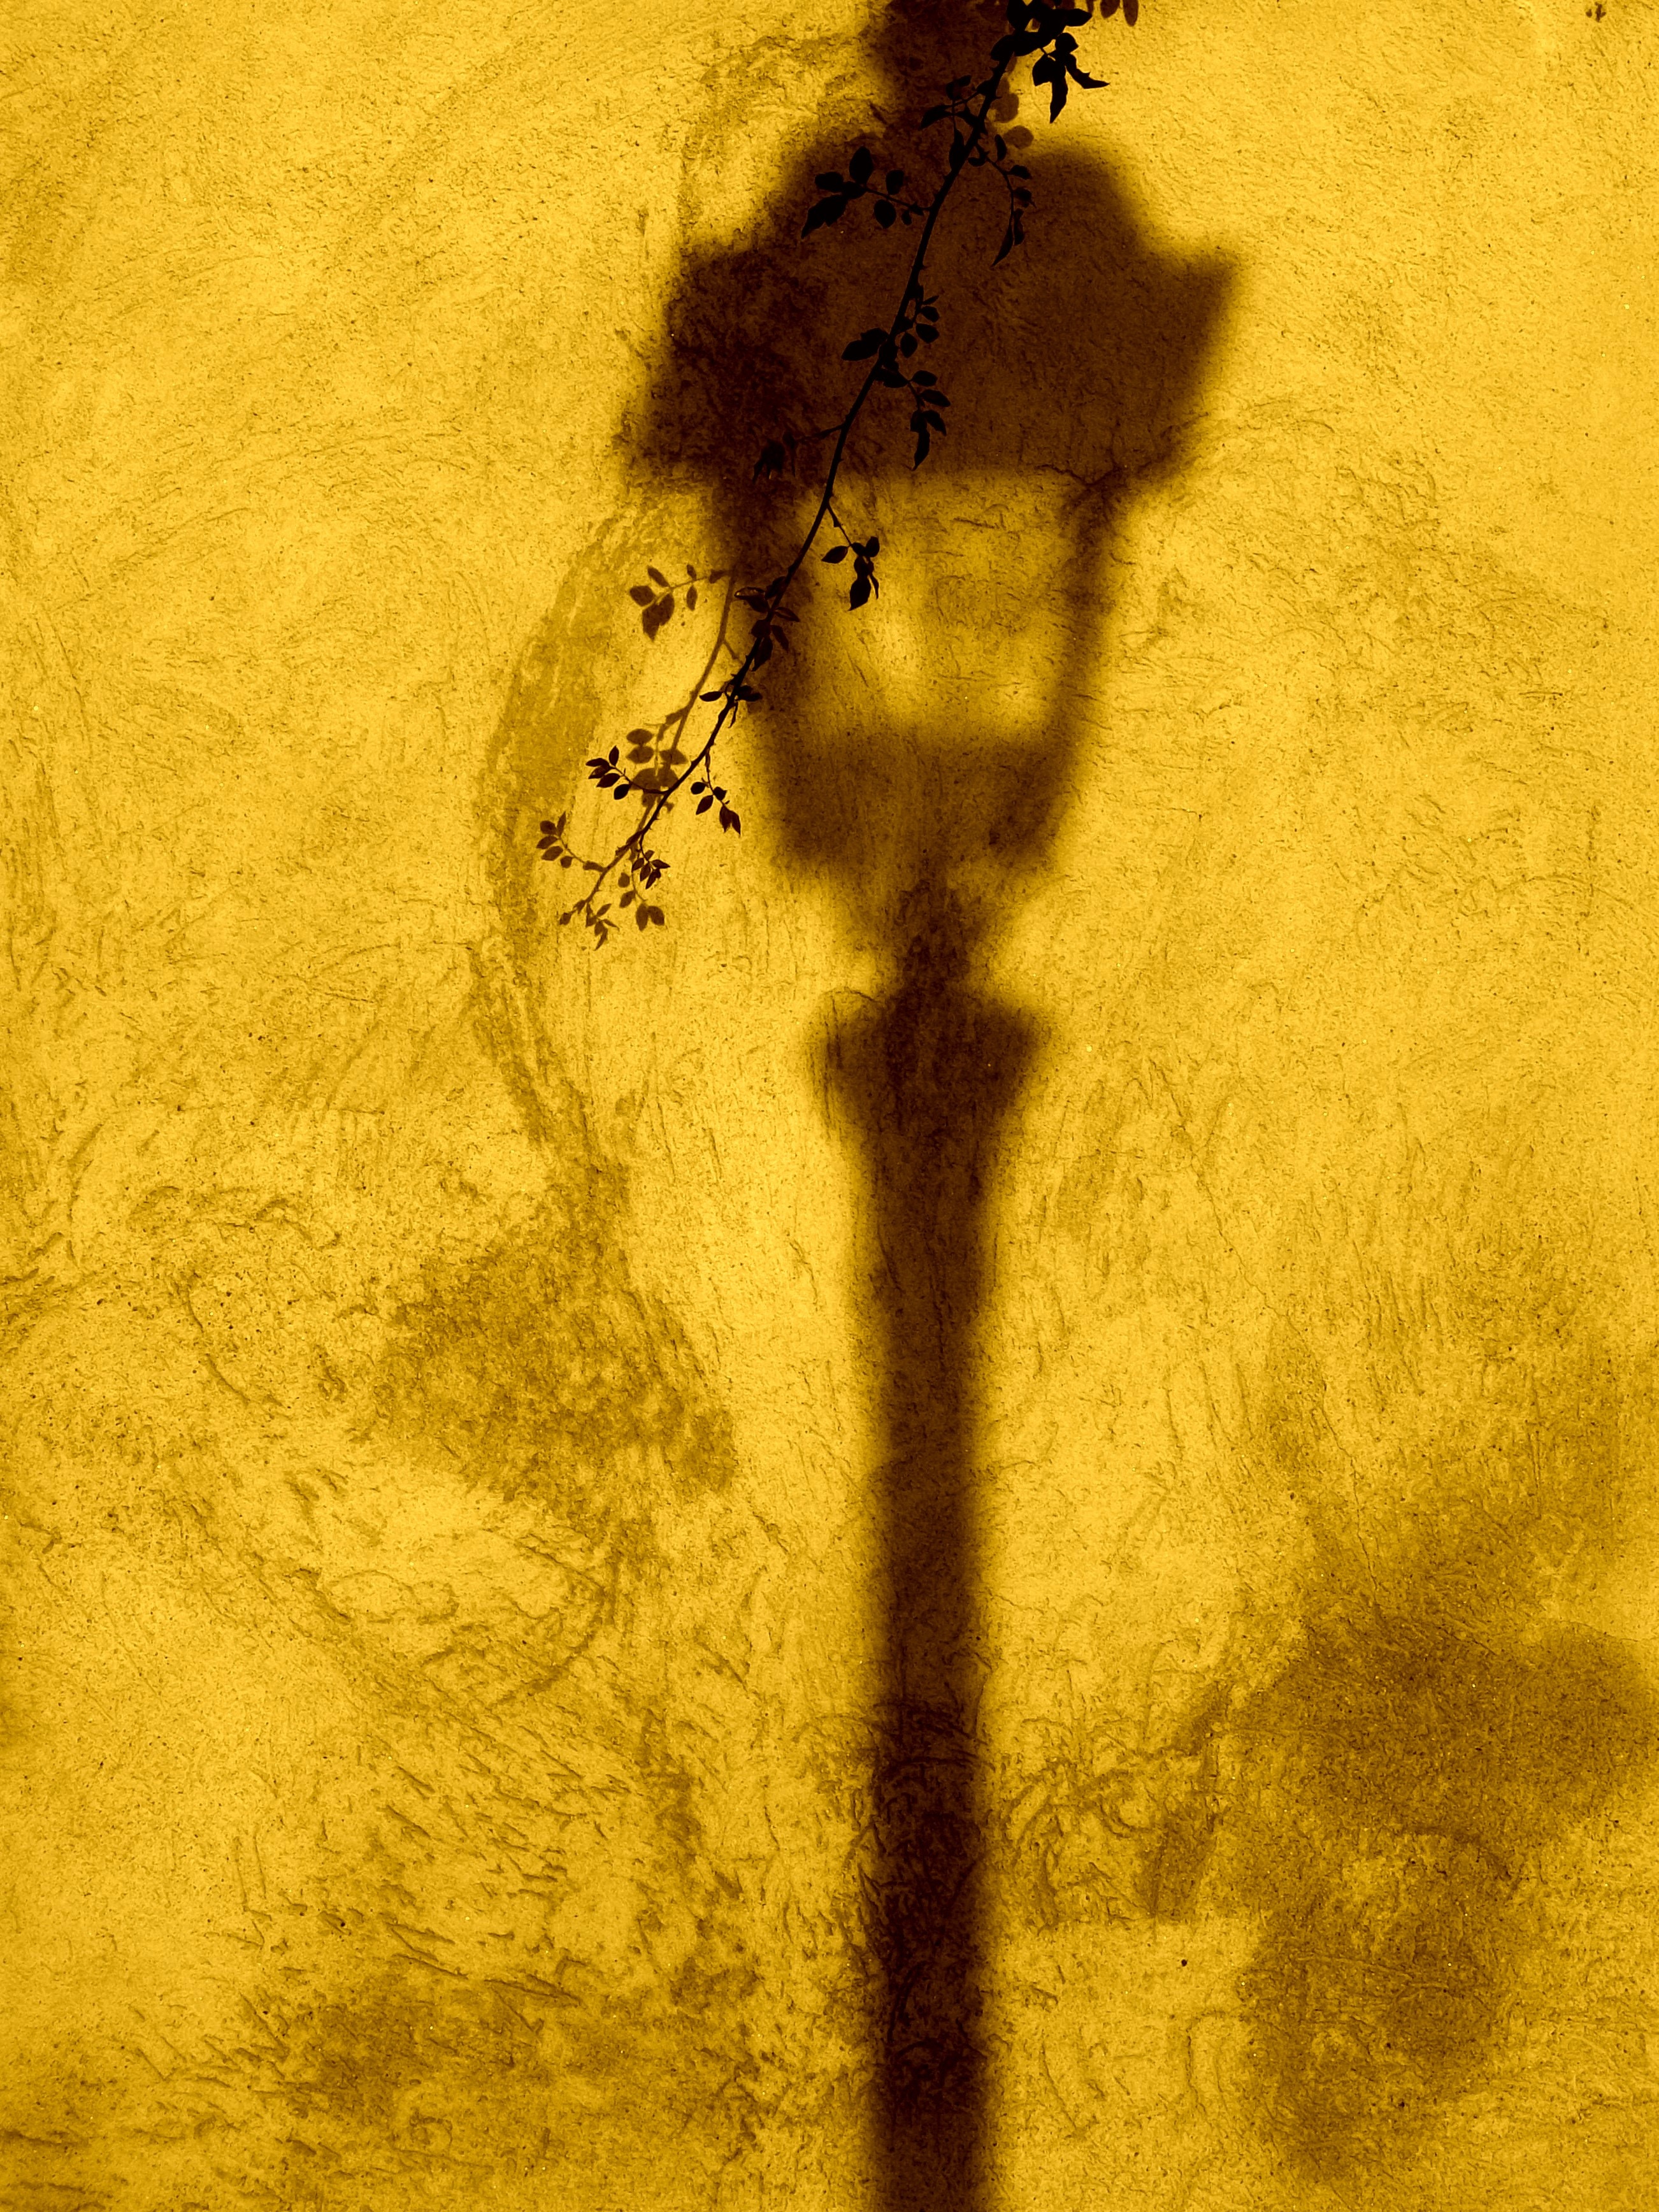 lantern, lamp, yellow, texture, textures, branch, shadow, wall wallpaper for mobile